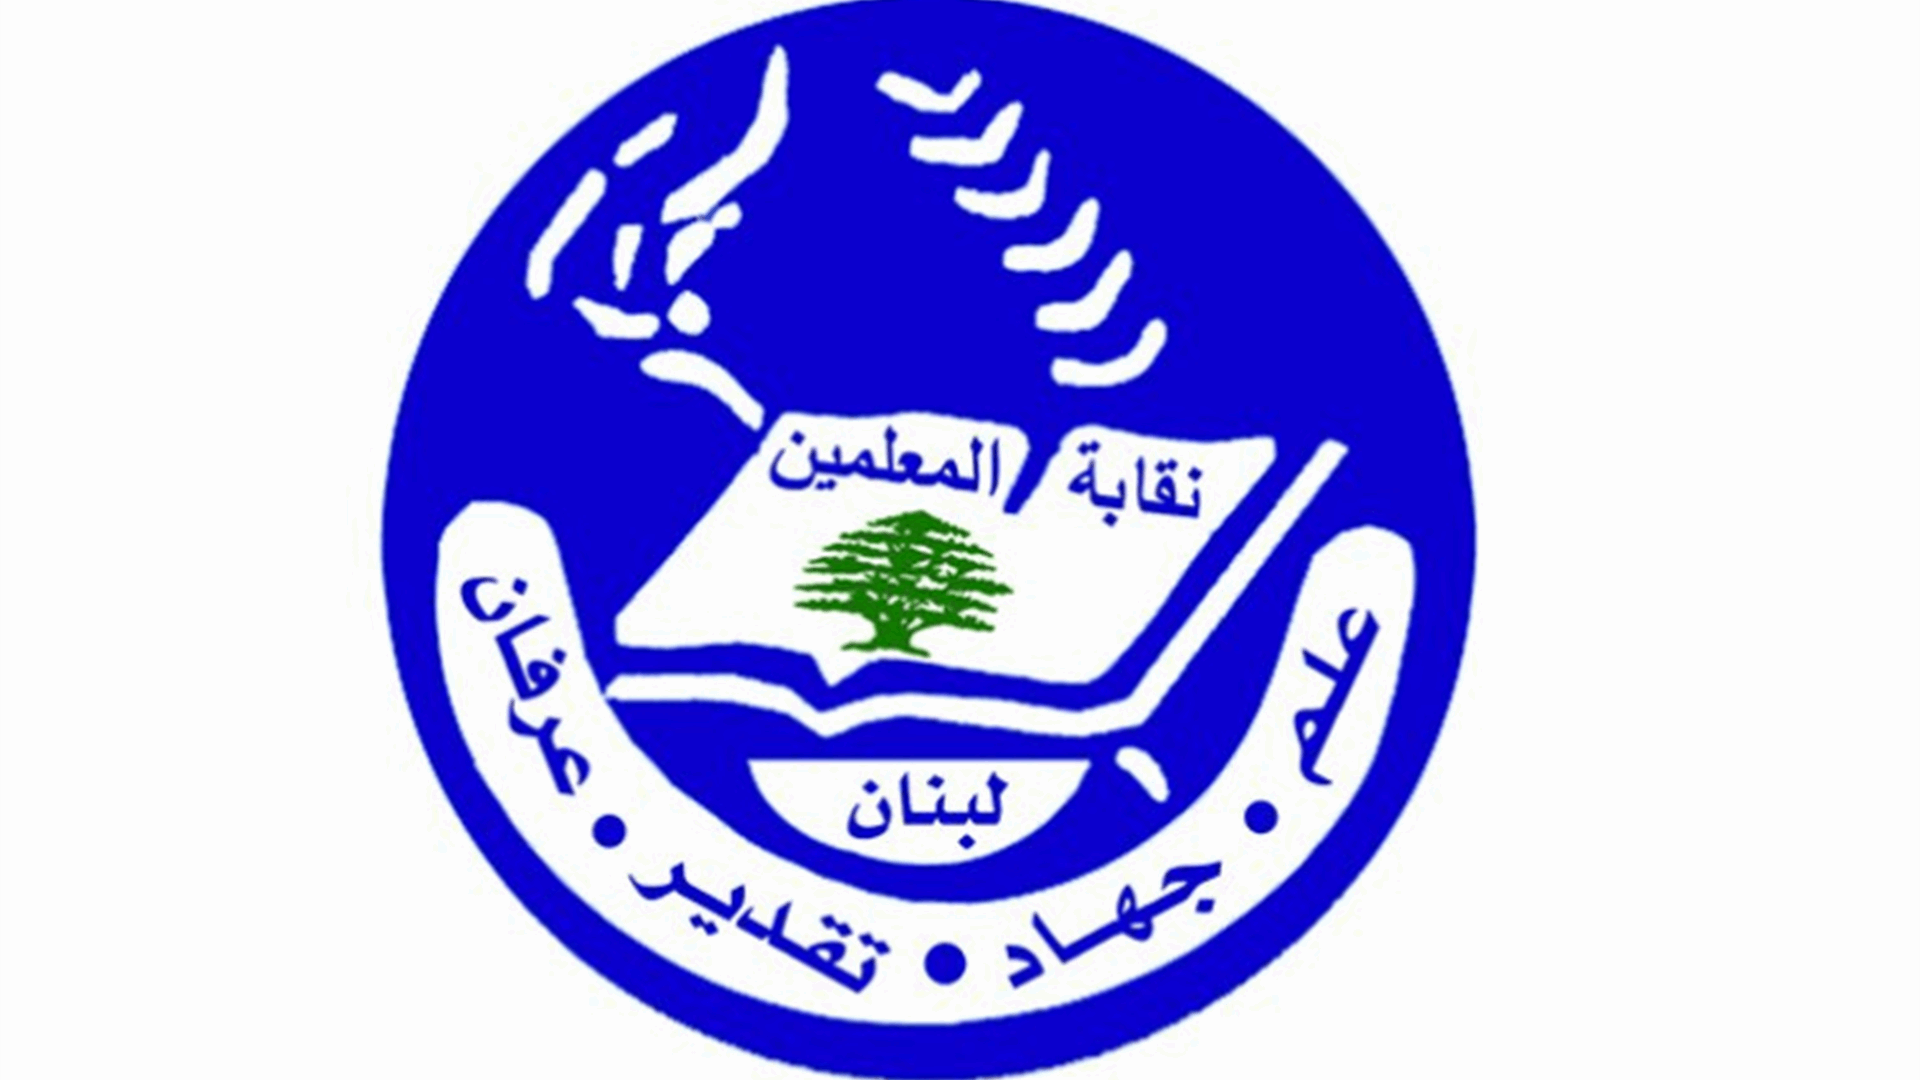 Class in session: Lebanon&#39;s private schools resume regular work amid agreement 